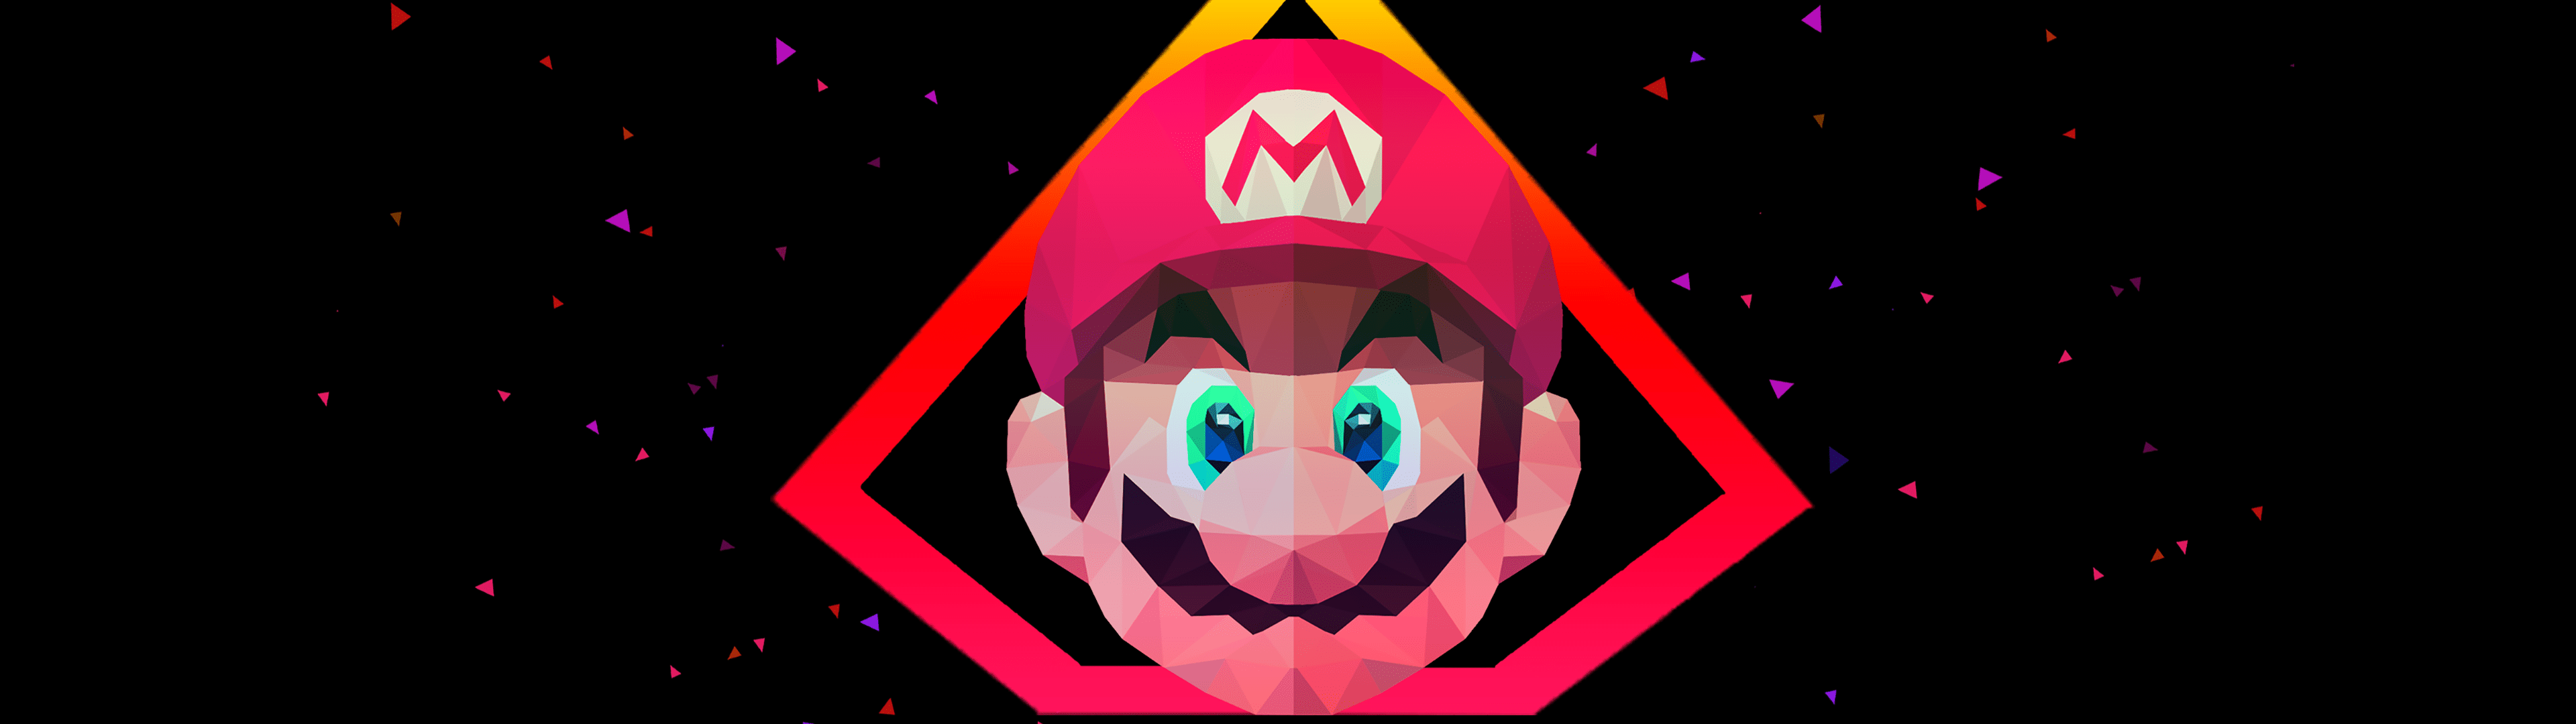 Mario in a geometric style, low poly art - Low poly